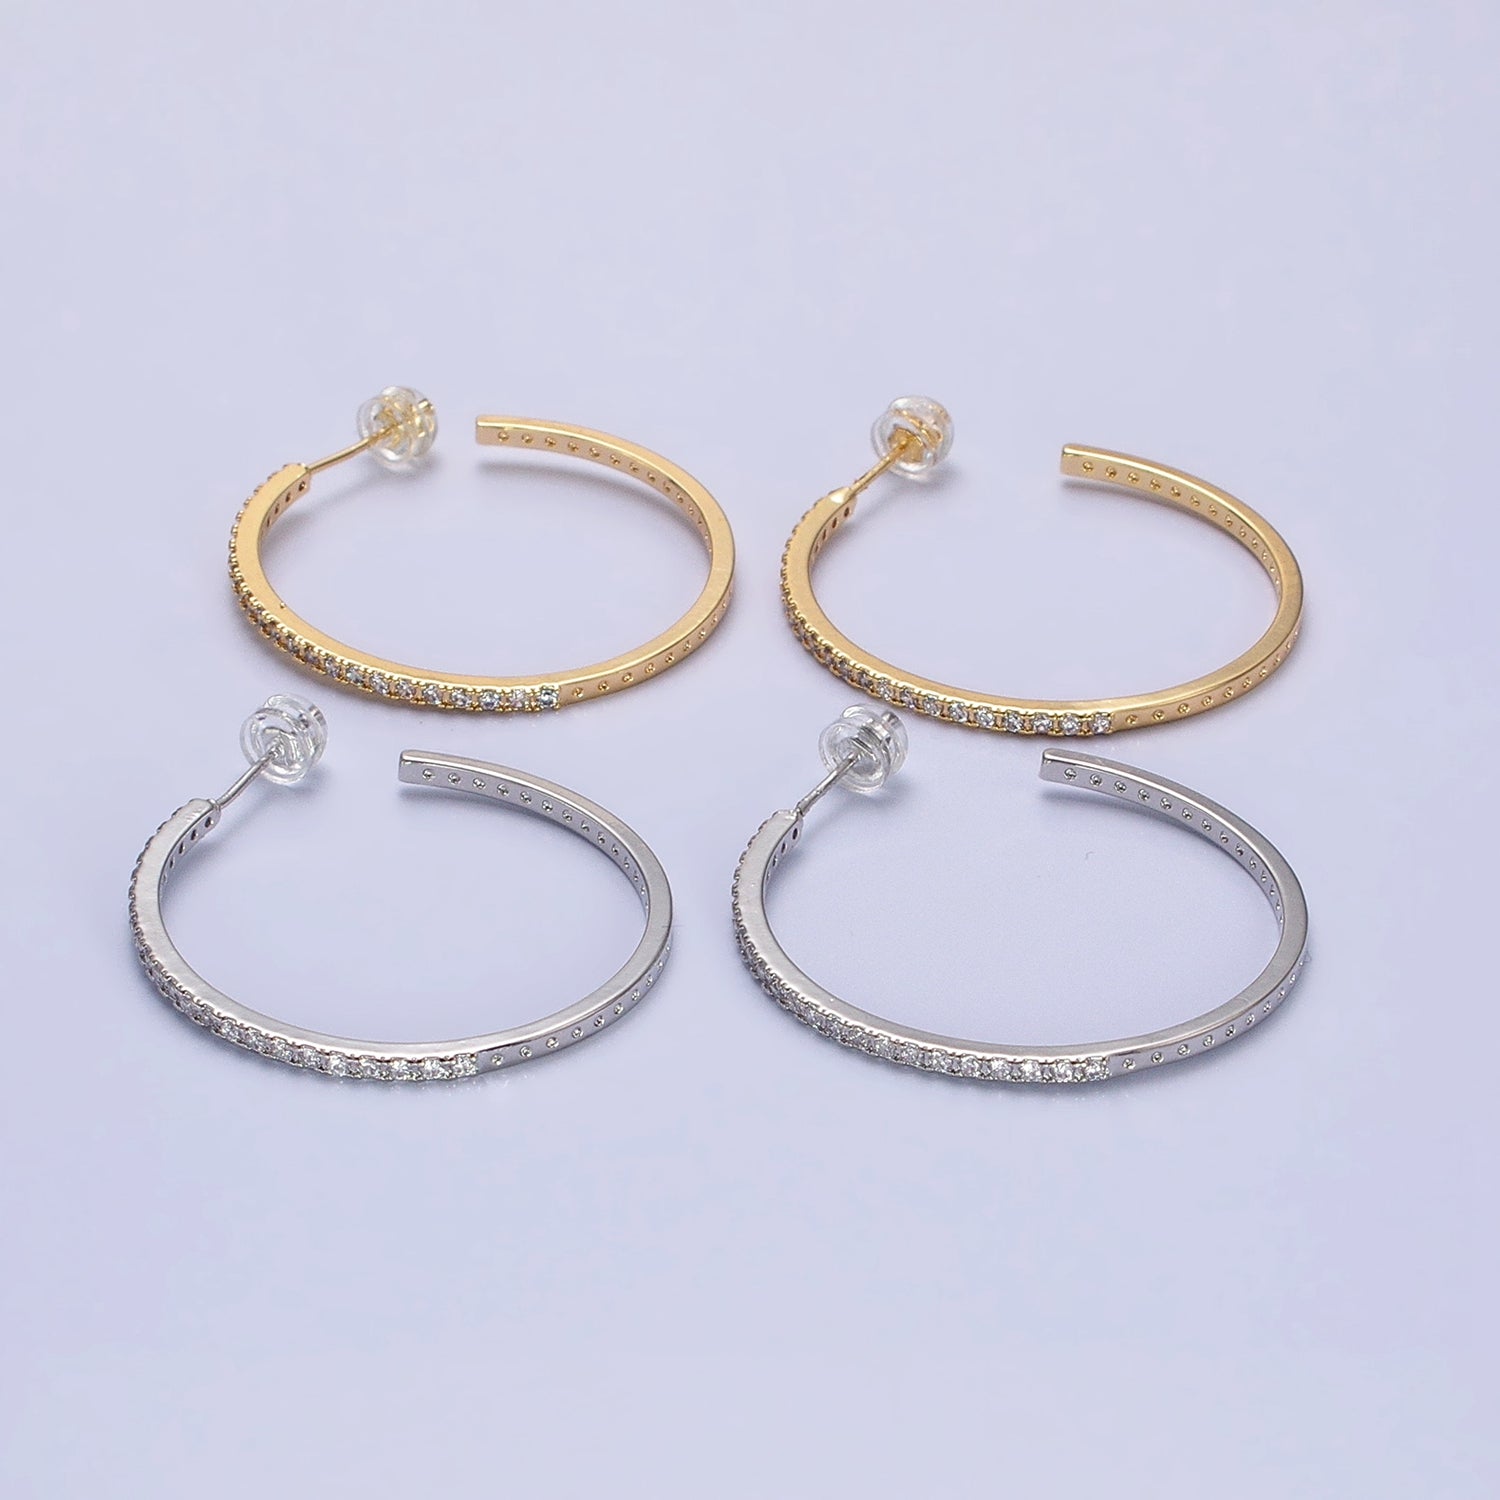 Minimalist Gold Hoop Earring with CZ Stone Simple Silver Hoop Earring for Everyday Use AB674 AB677 - DLUXCA